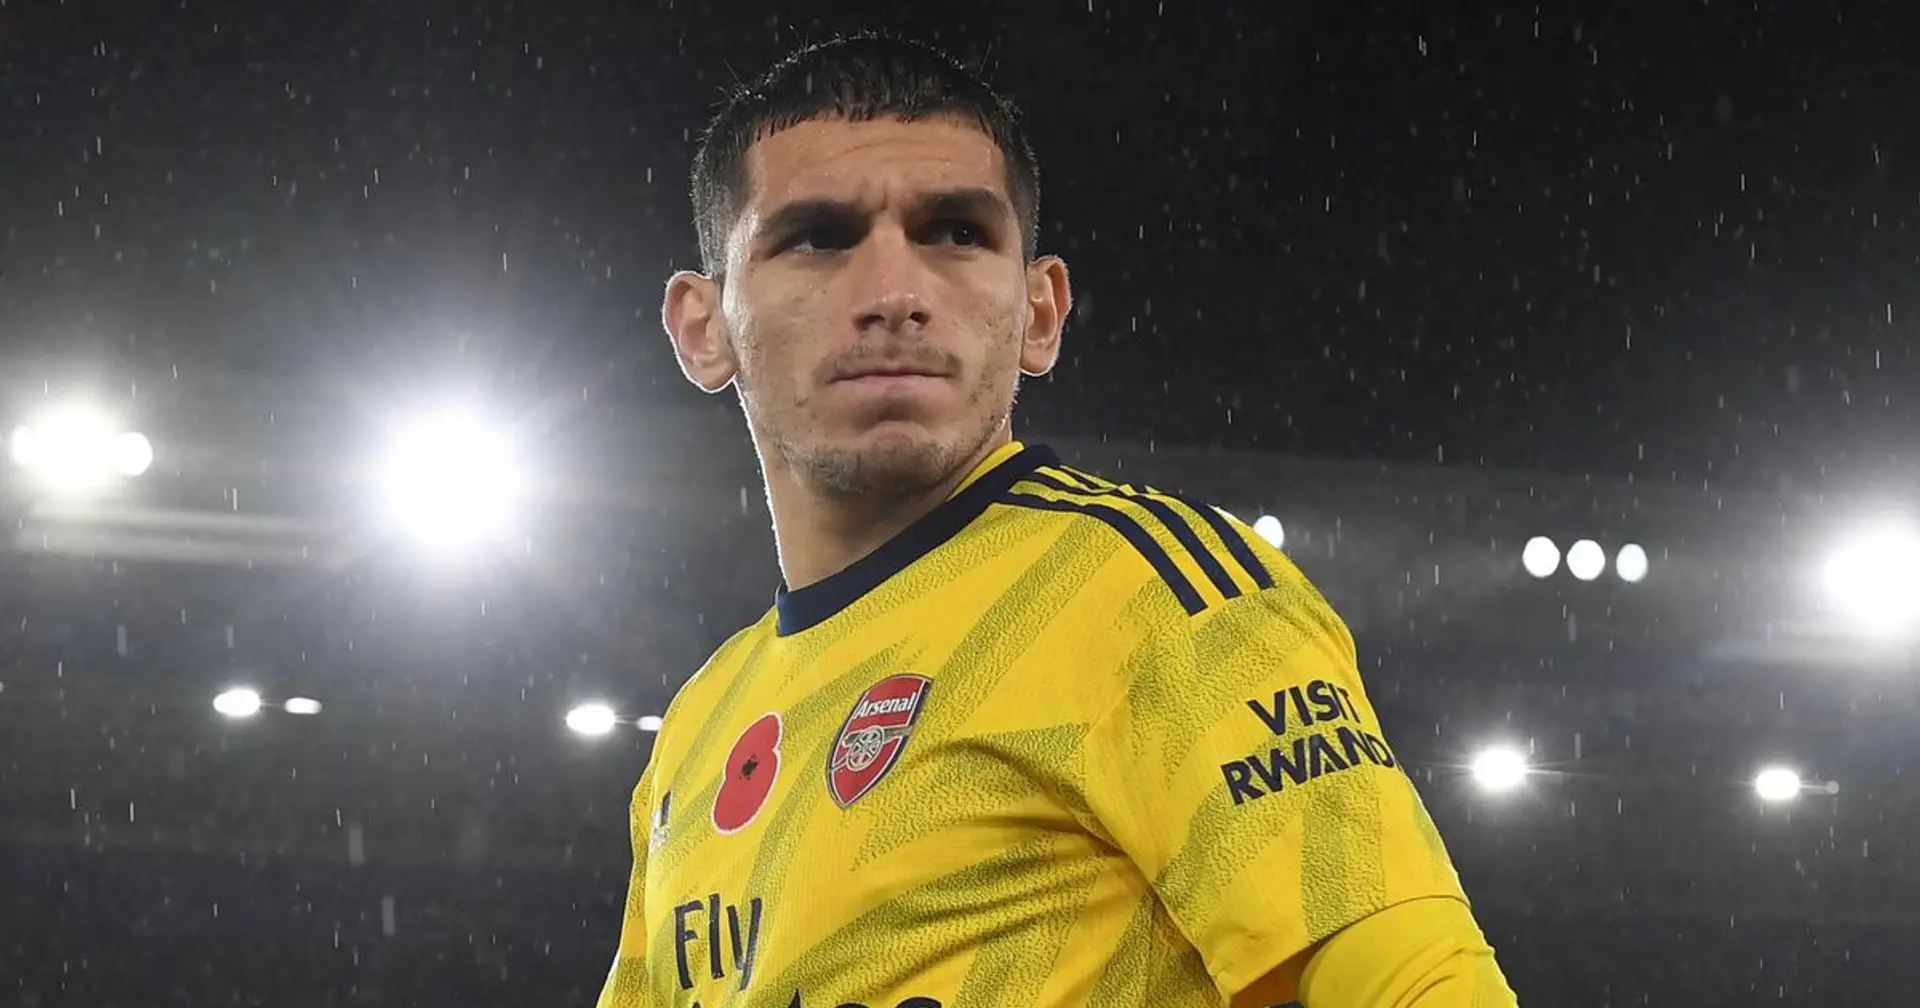 Lucas Torreira shows off his perfect form ahead of season restart